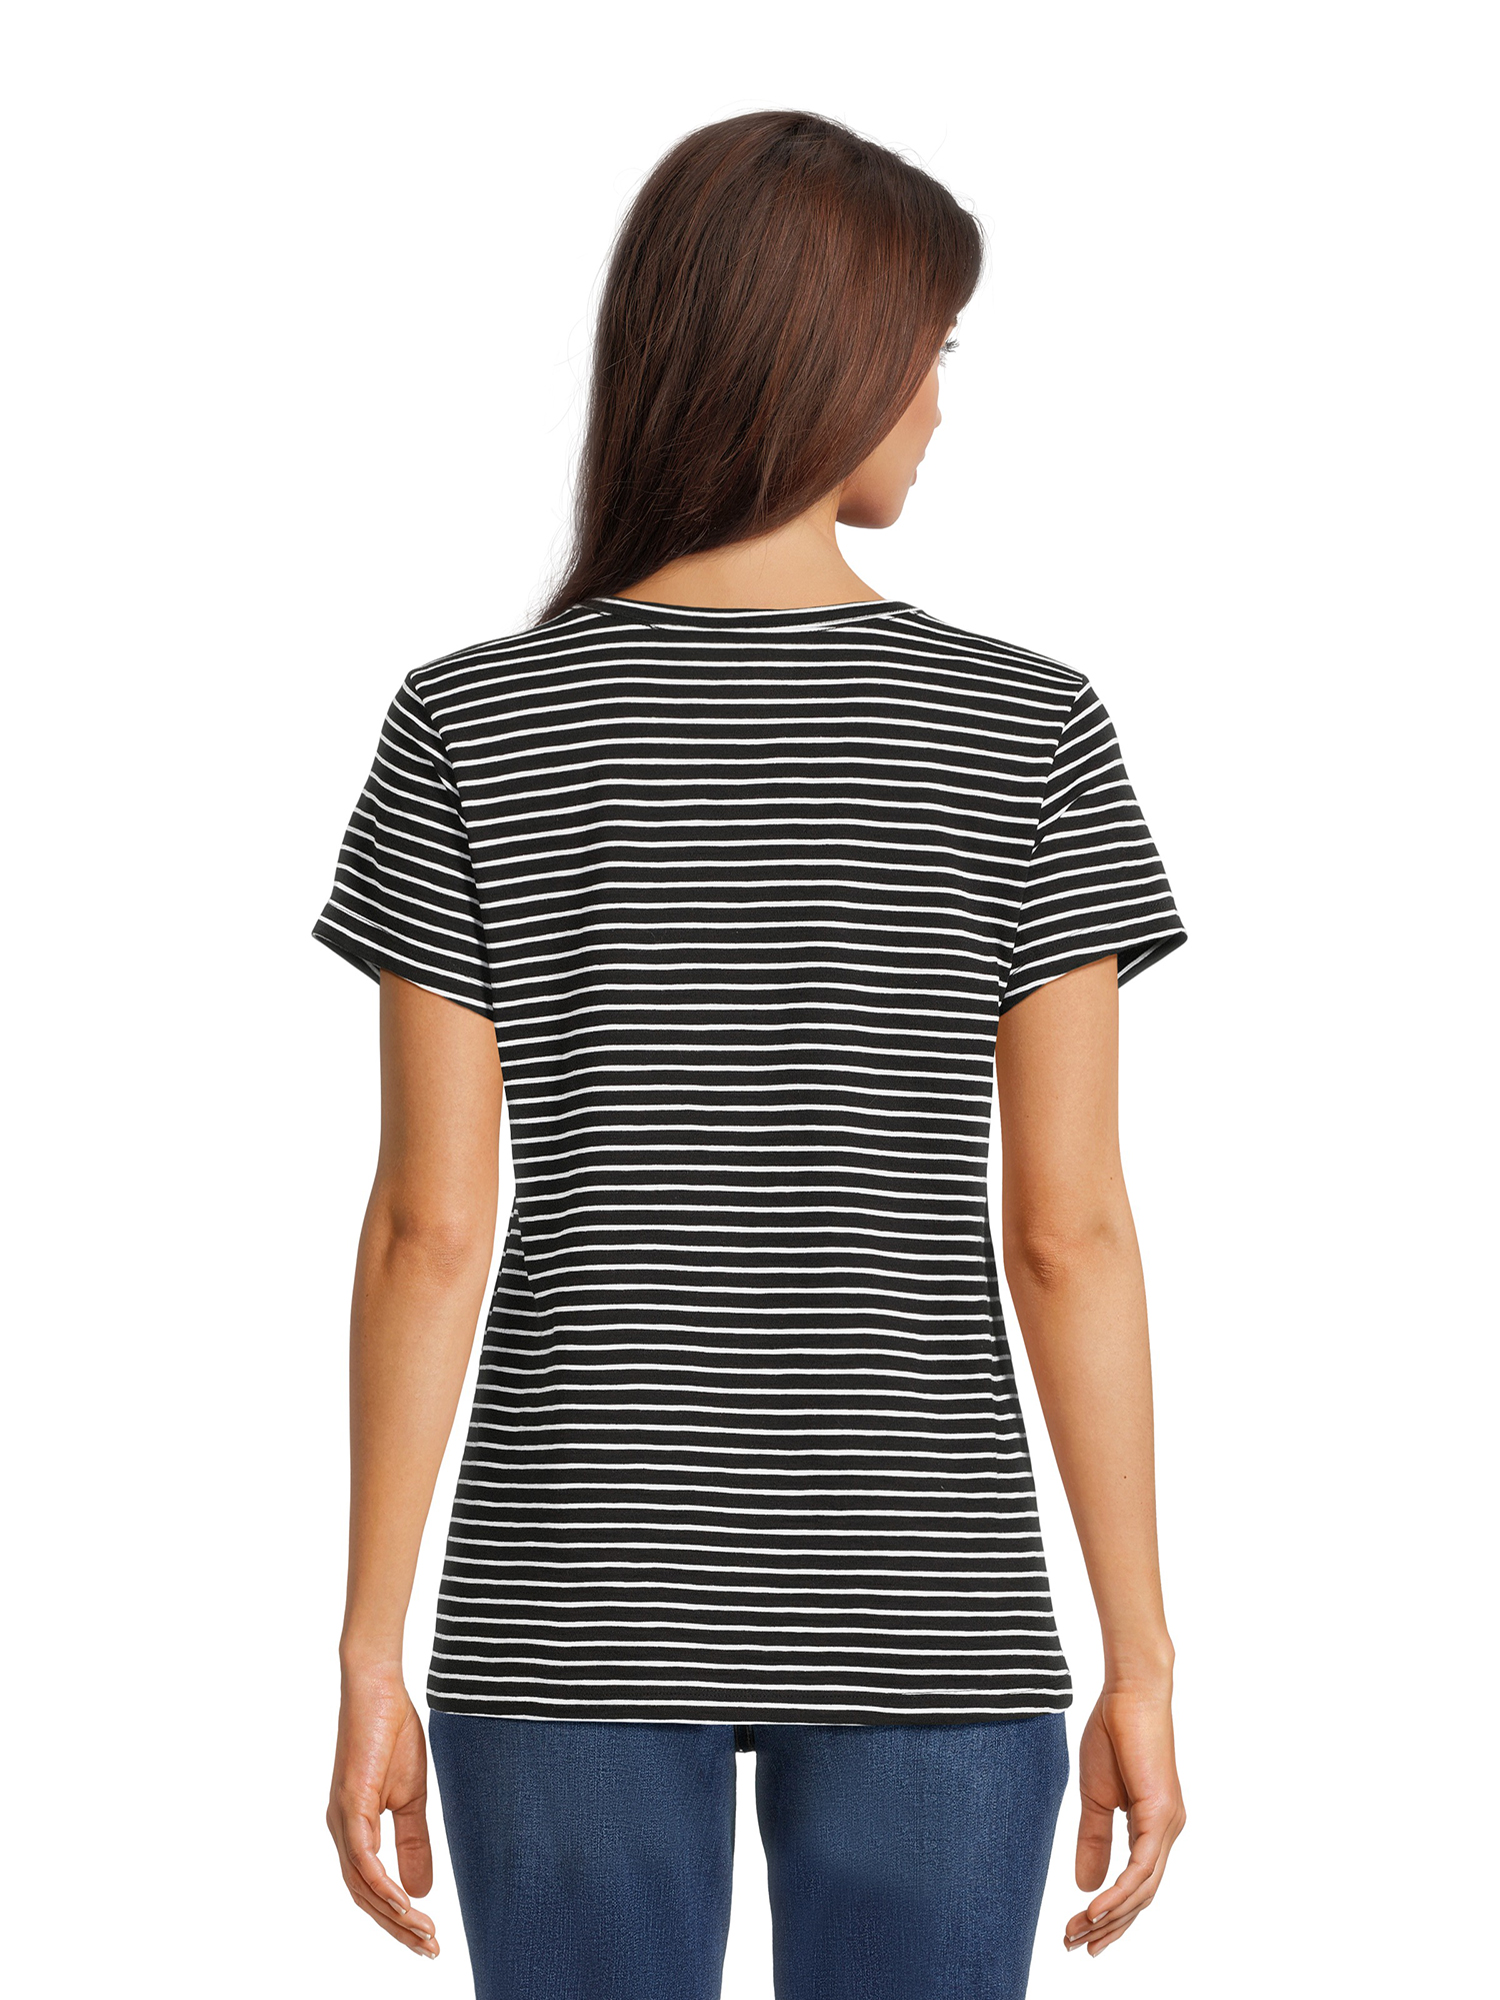 Time and Tru Women's Slub Texture Tee with Short Sleeves, Sizes S-XXXL - image 3 of 6